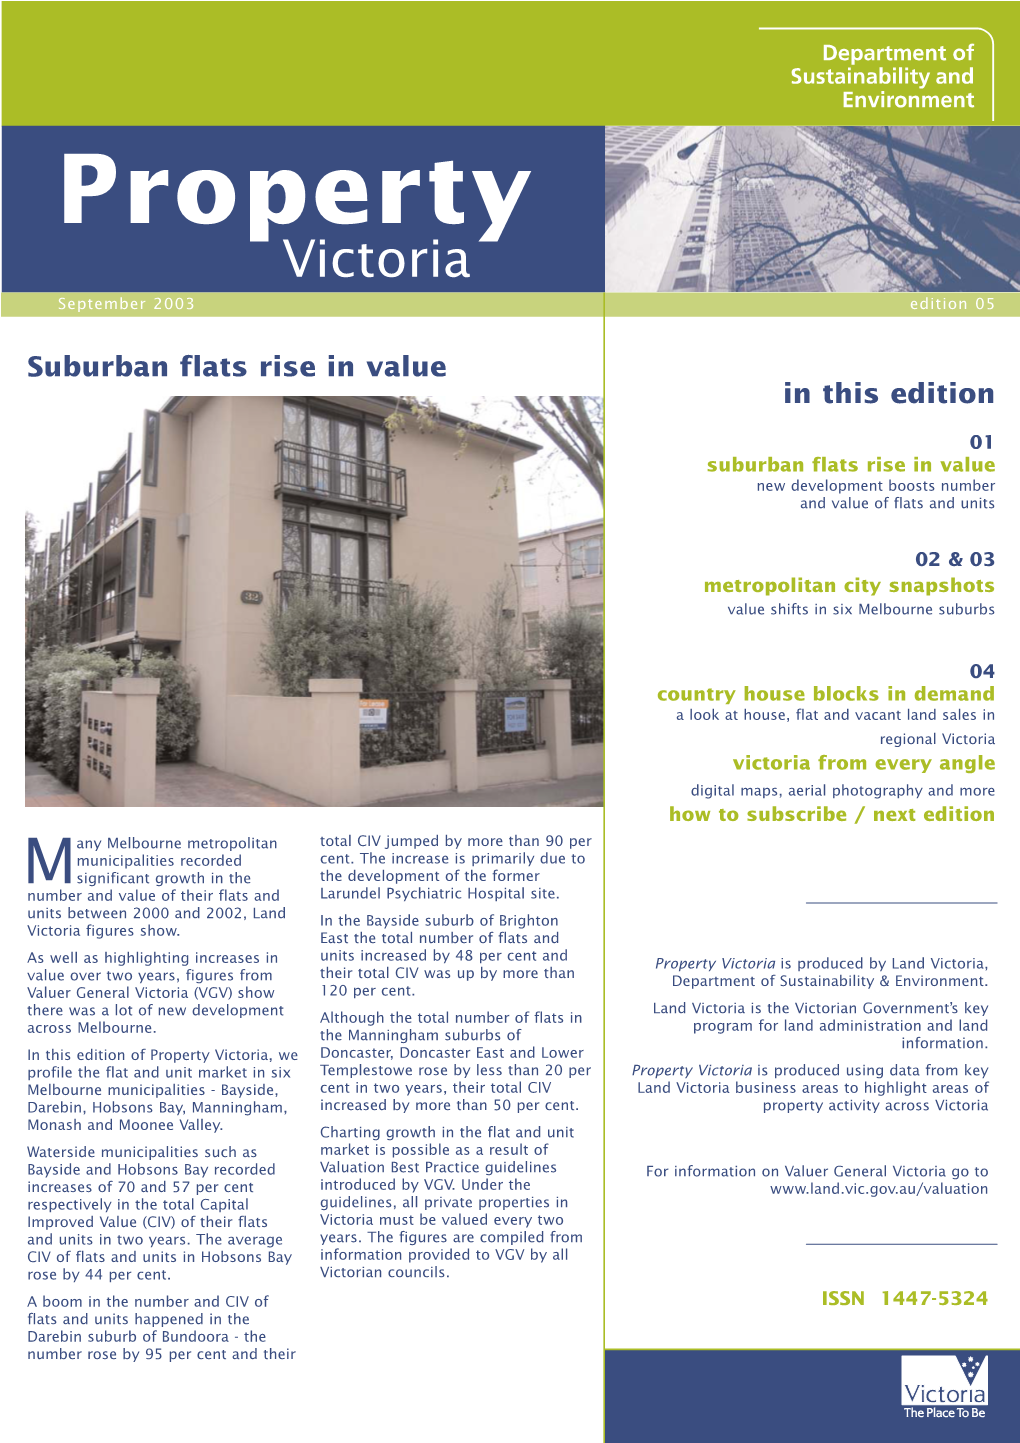 Property Victoria September 2003 Edition 05